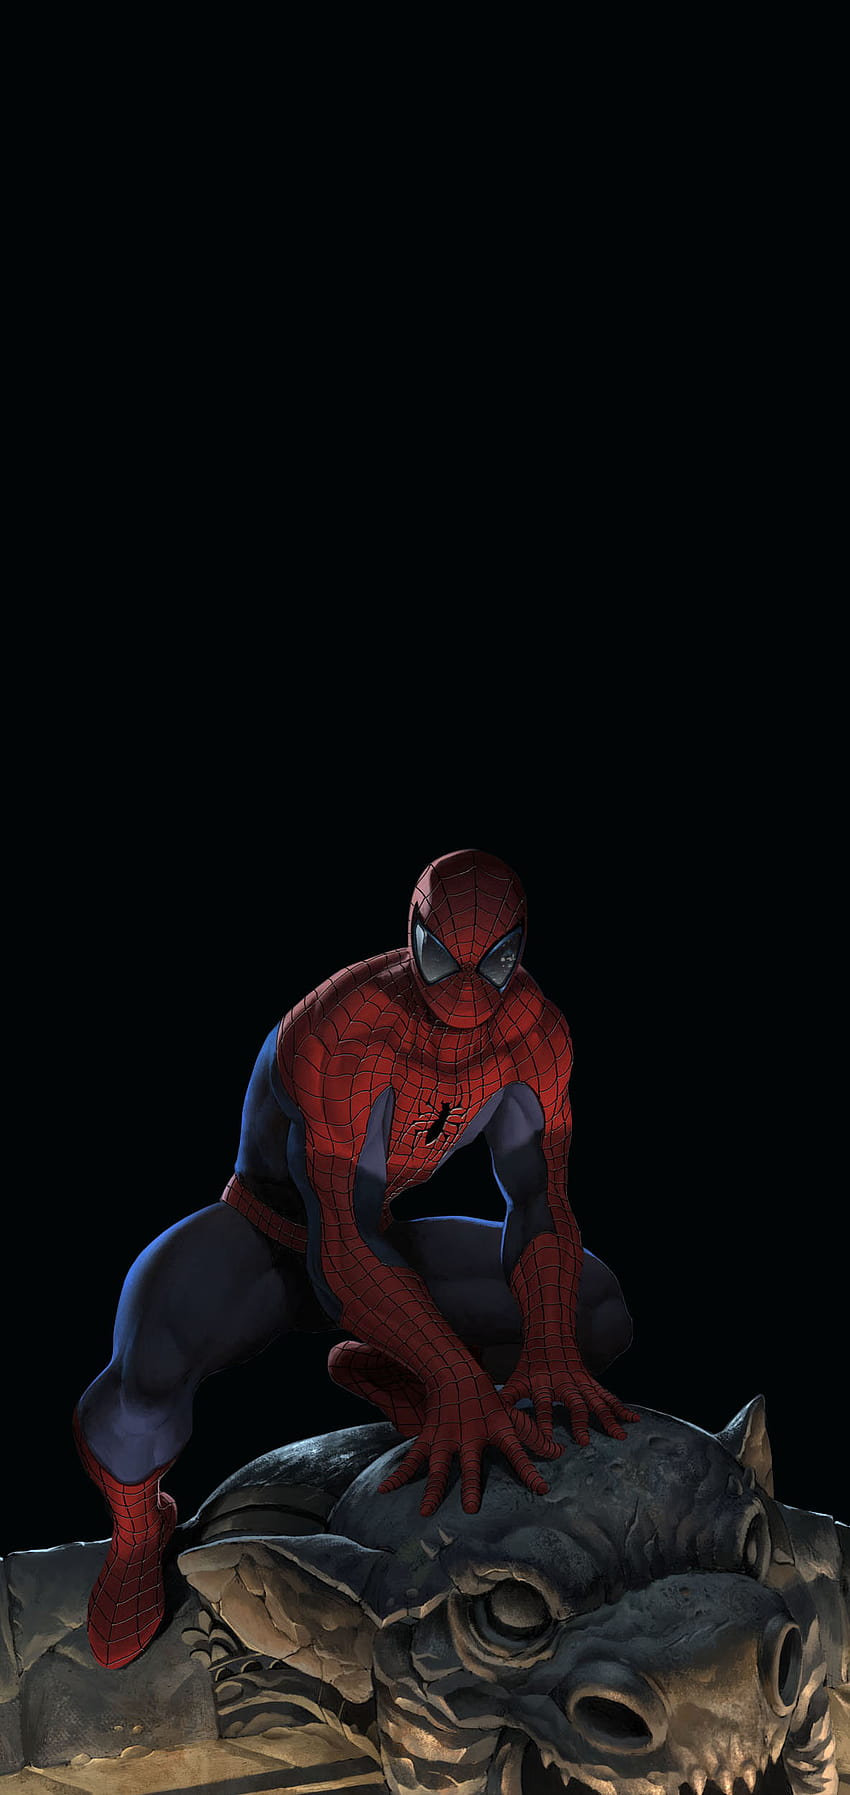 Spiderman Amoled, into the spider verse oled HD phone wallpaper